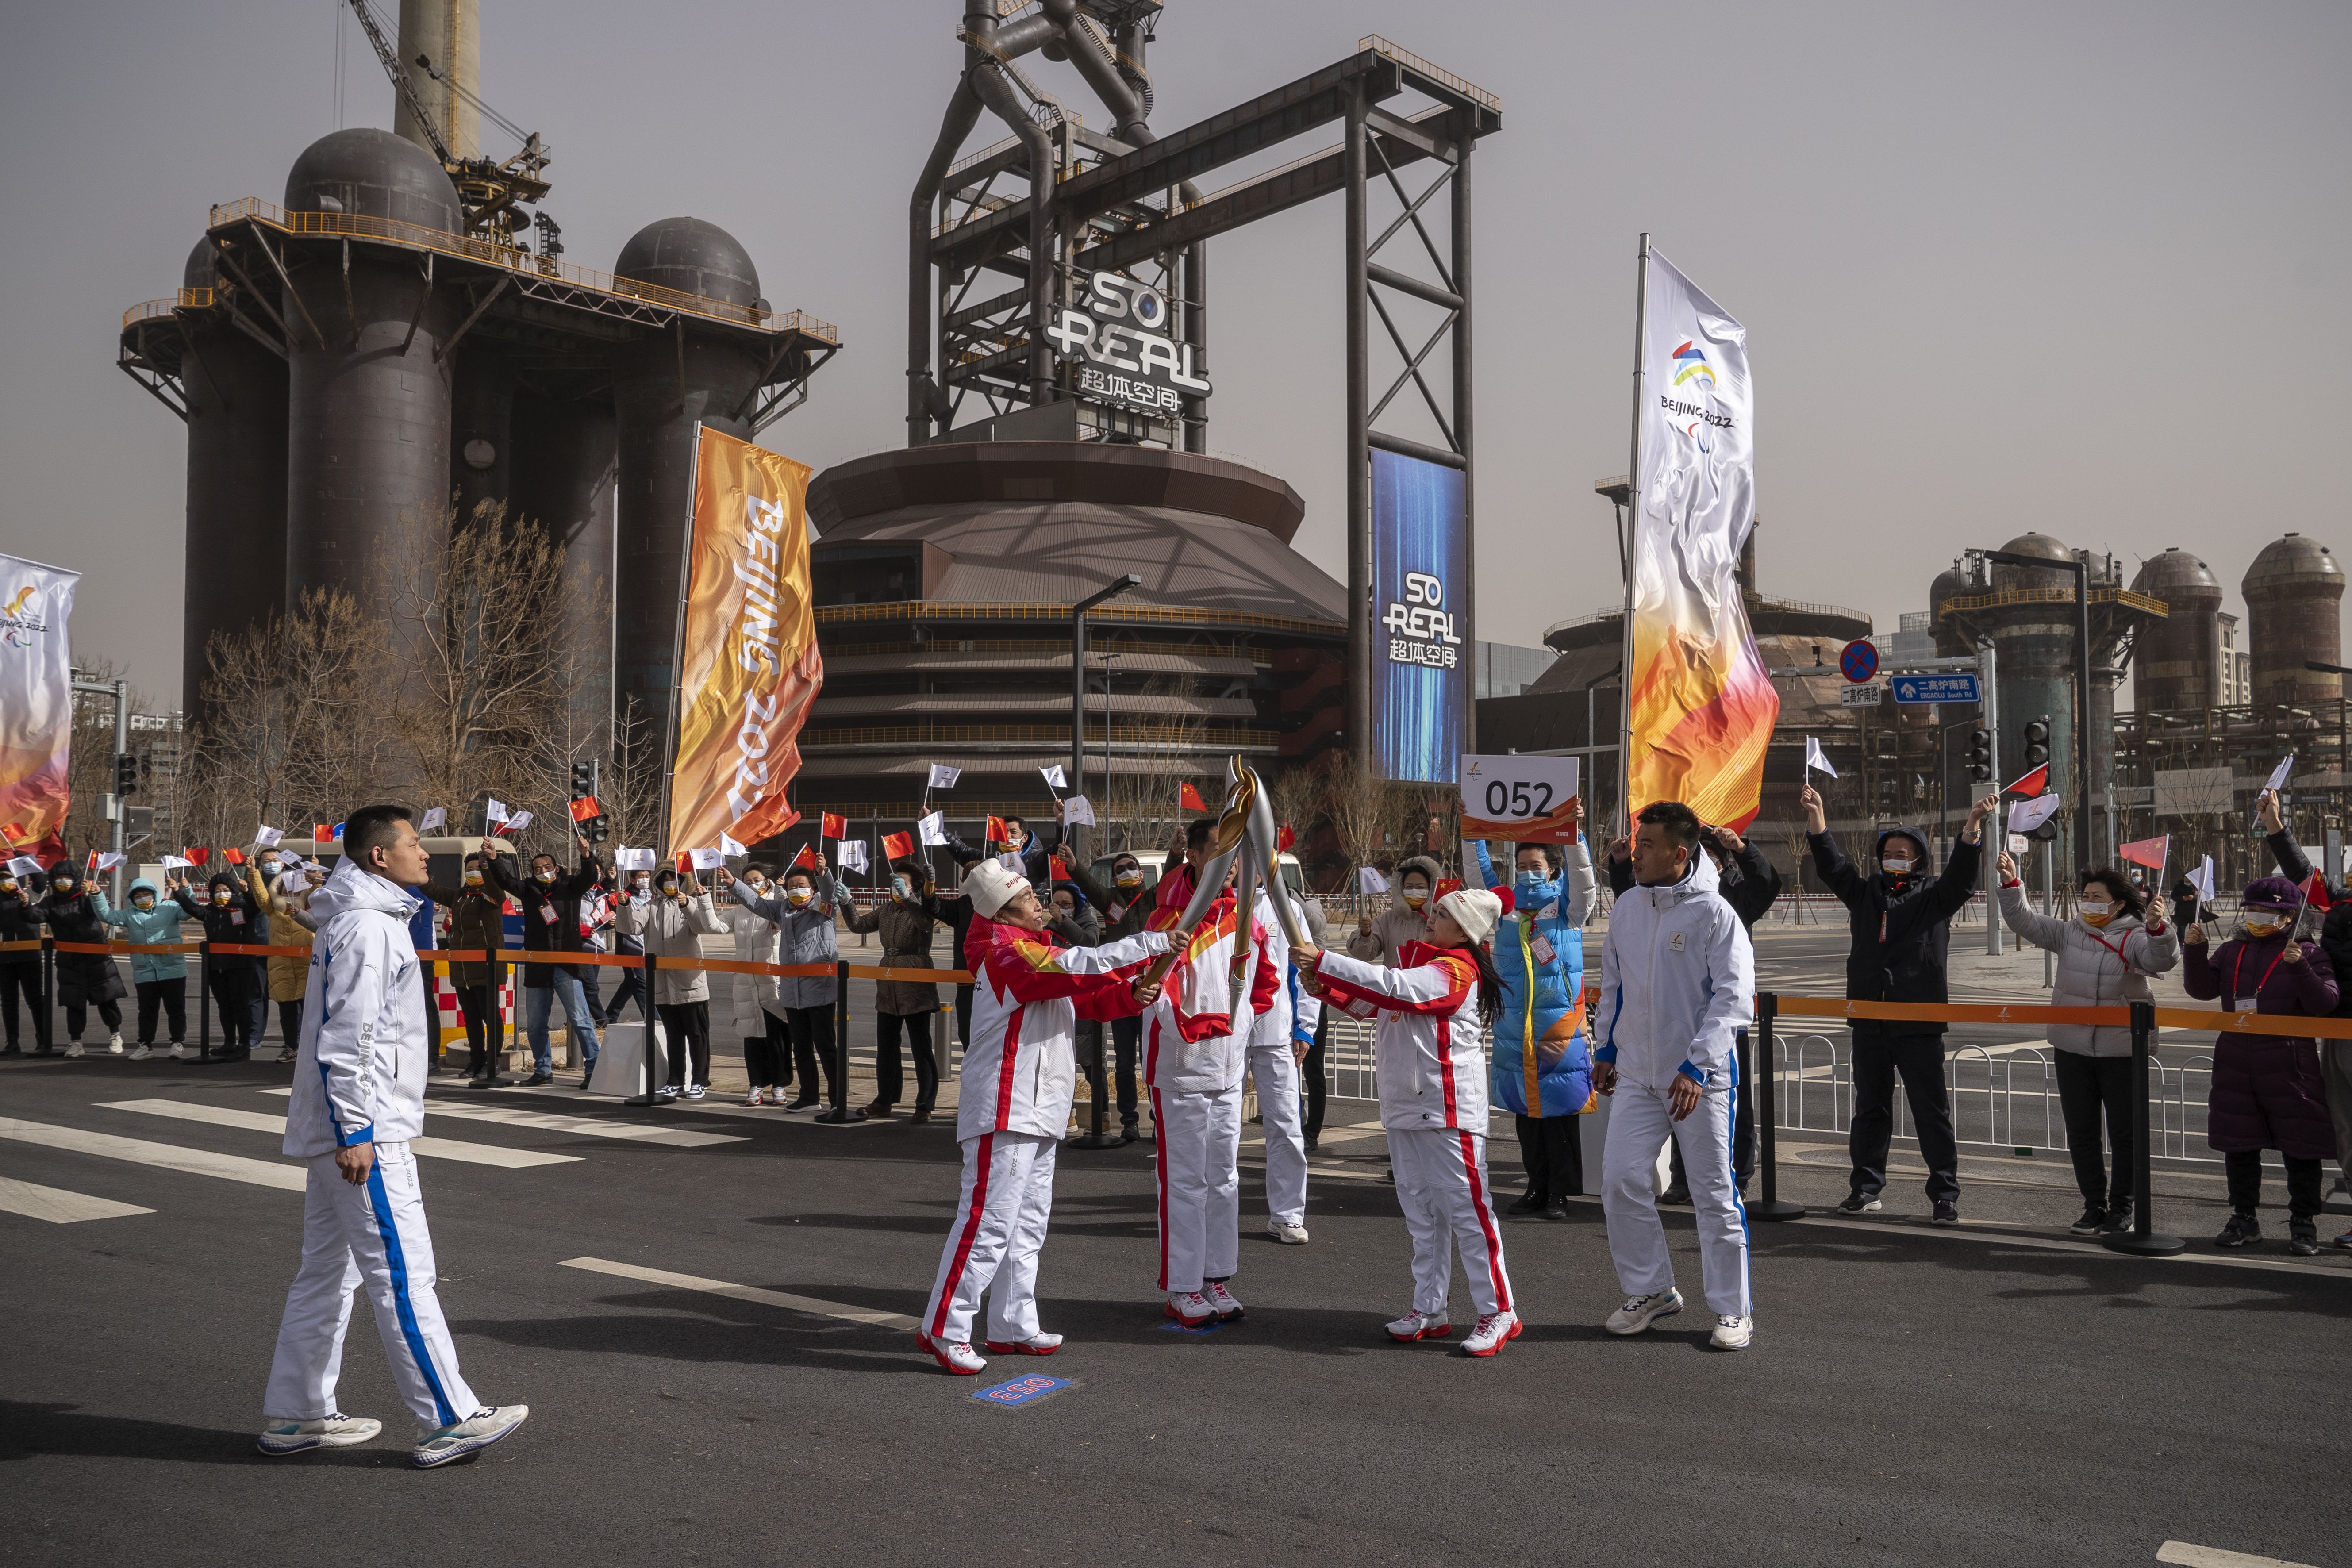 Torch bearers pass the flame to each other during the Beijing 2022 Paralympic torch relay at Shougang Park on March 04, 2022